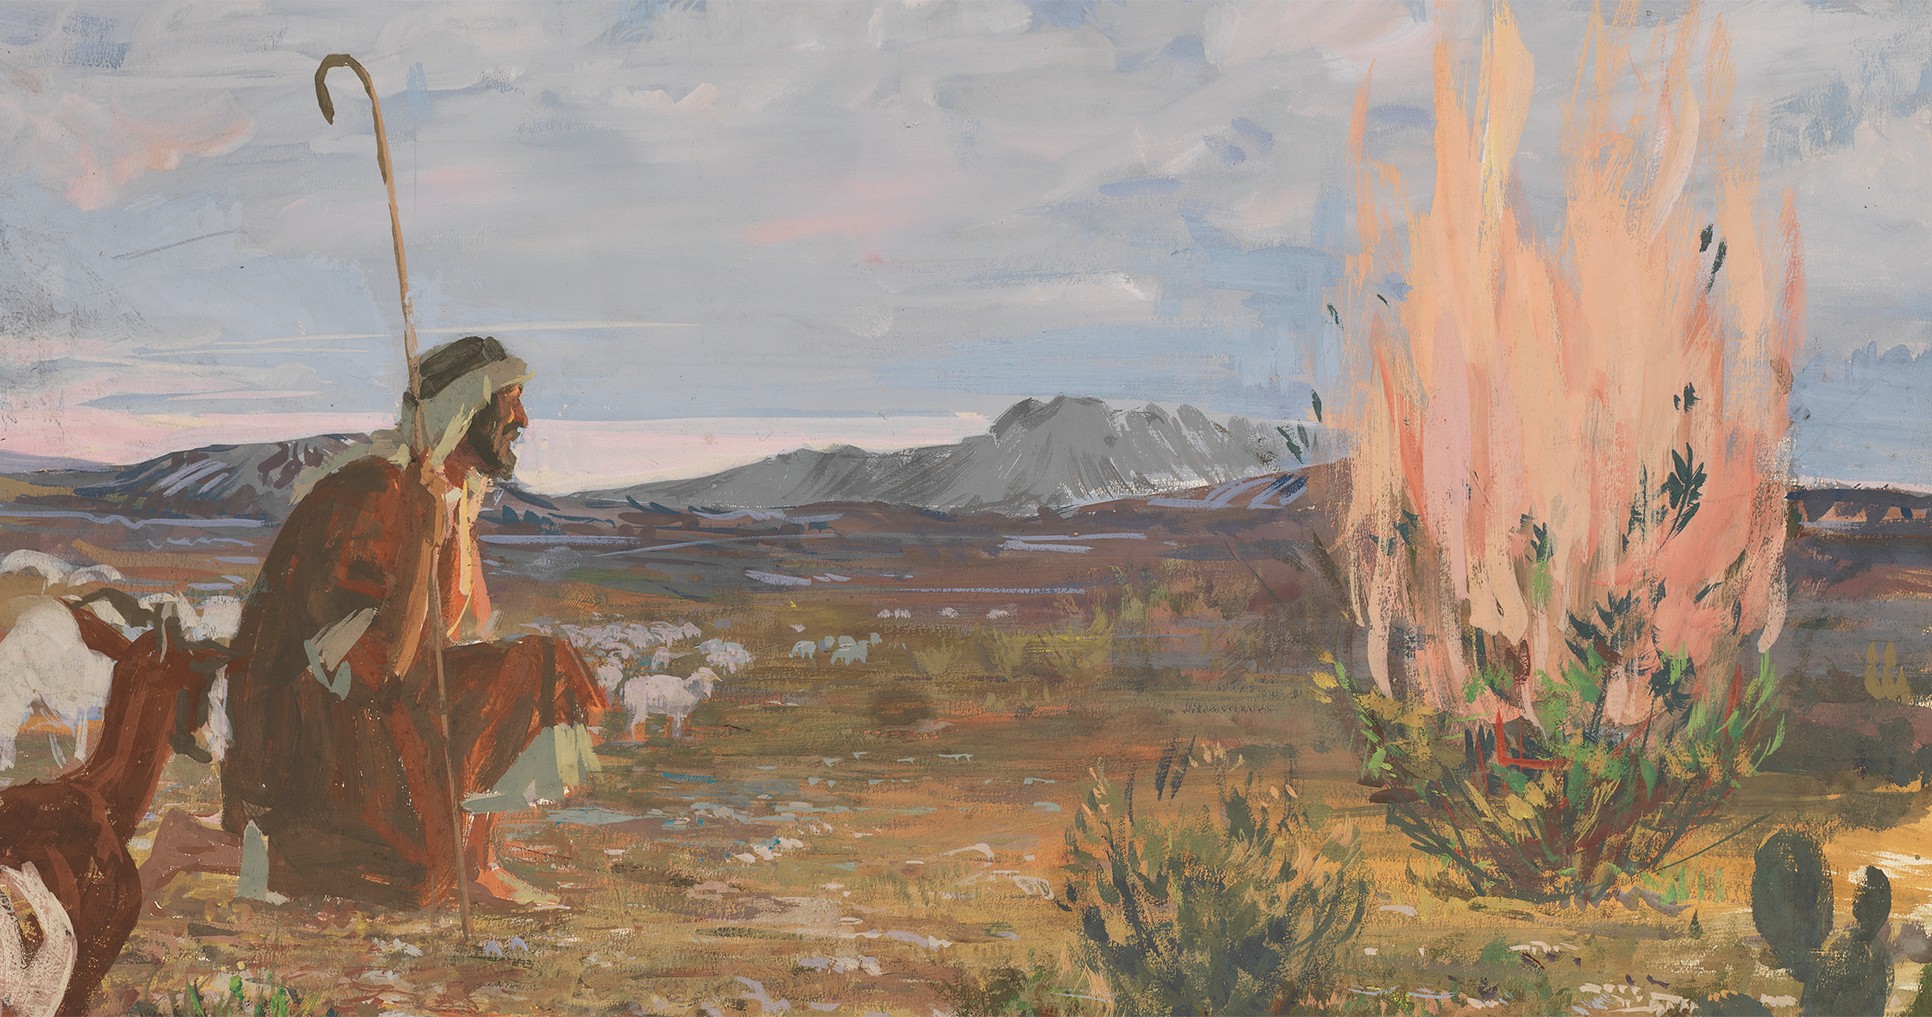 Preparatory sketch in casein on illustration board by artist Harry Anderson.  The sketch depicts the Old Testament prophet Moses kneeling before a burning bush (signifying an angel of the Lord appearing in the burning bush).  (Exodus 3:1-2)